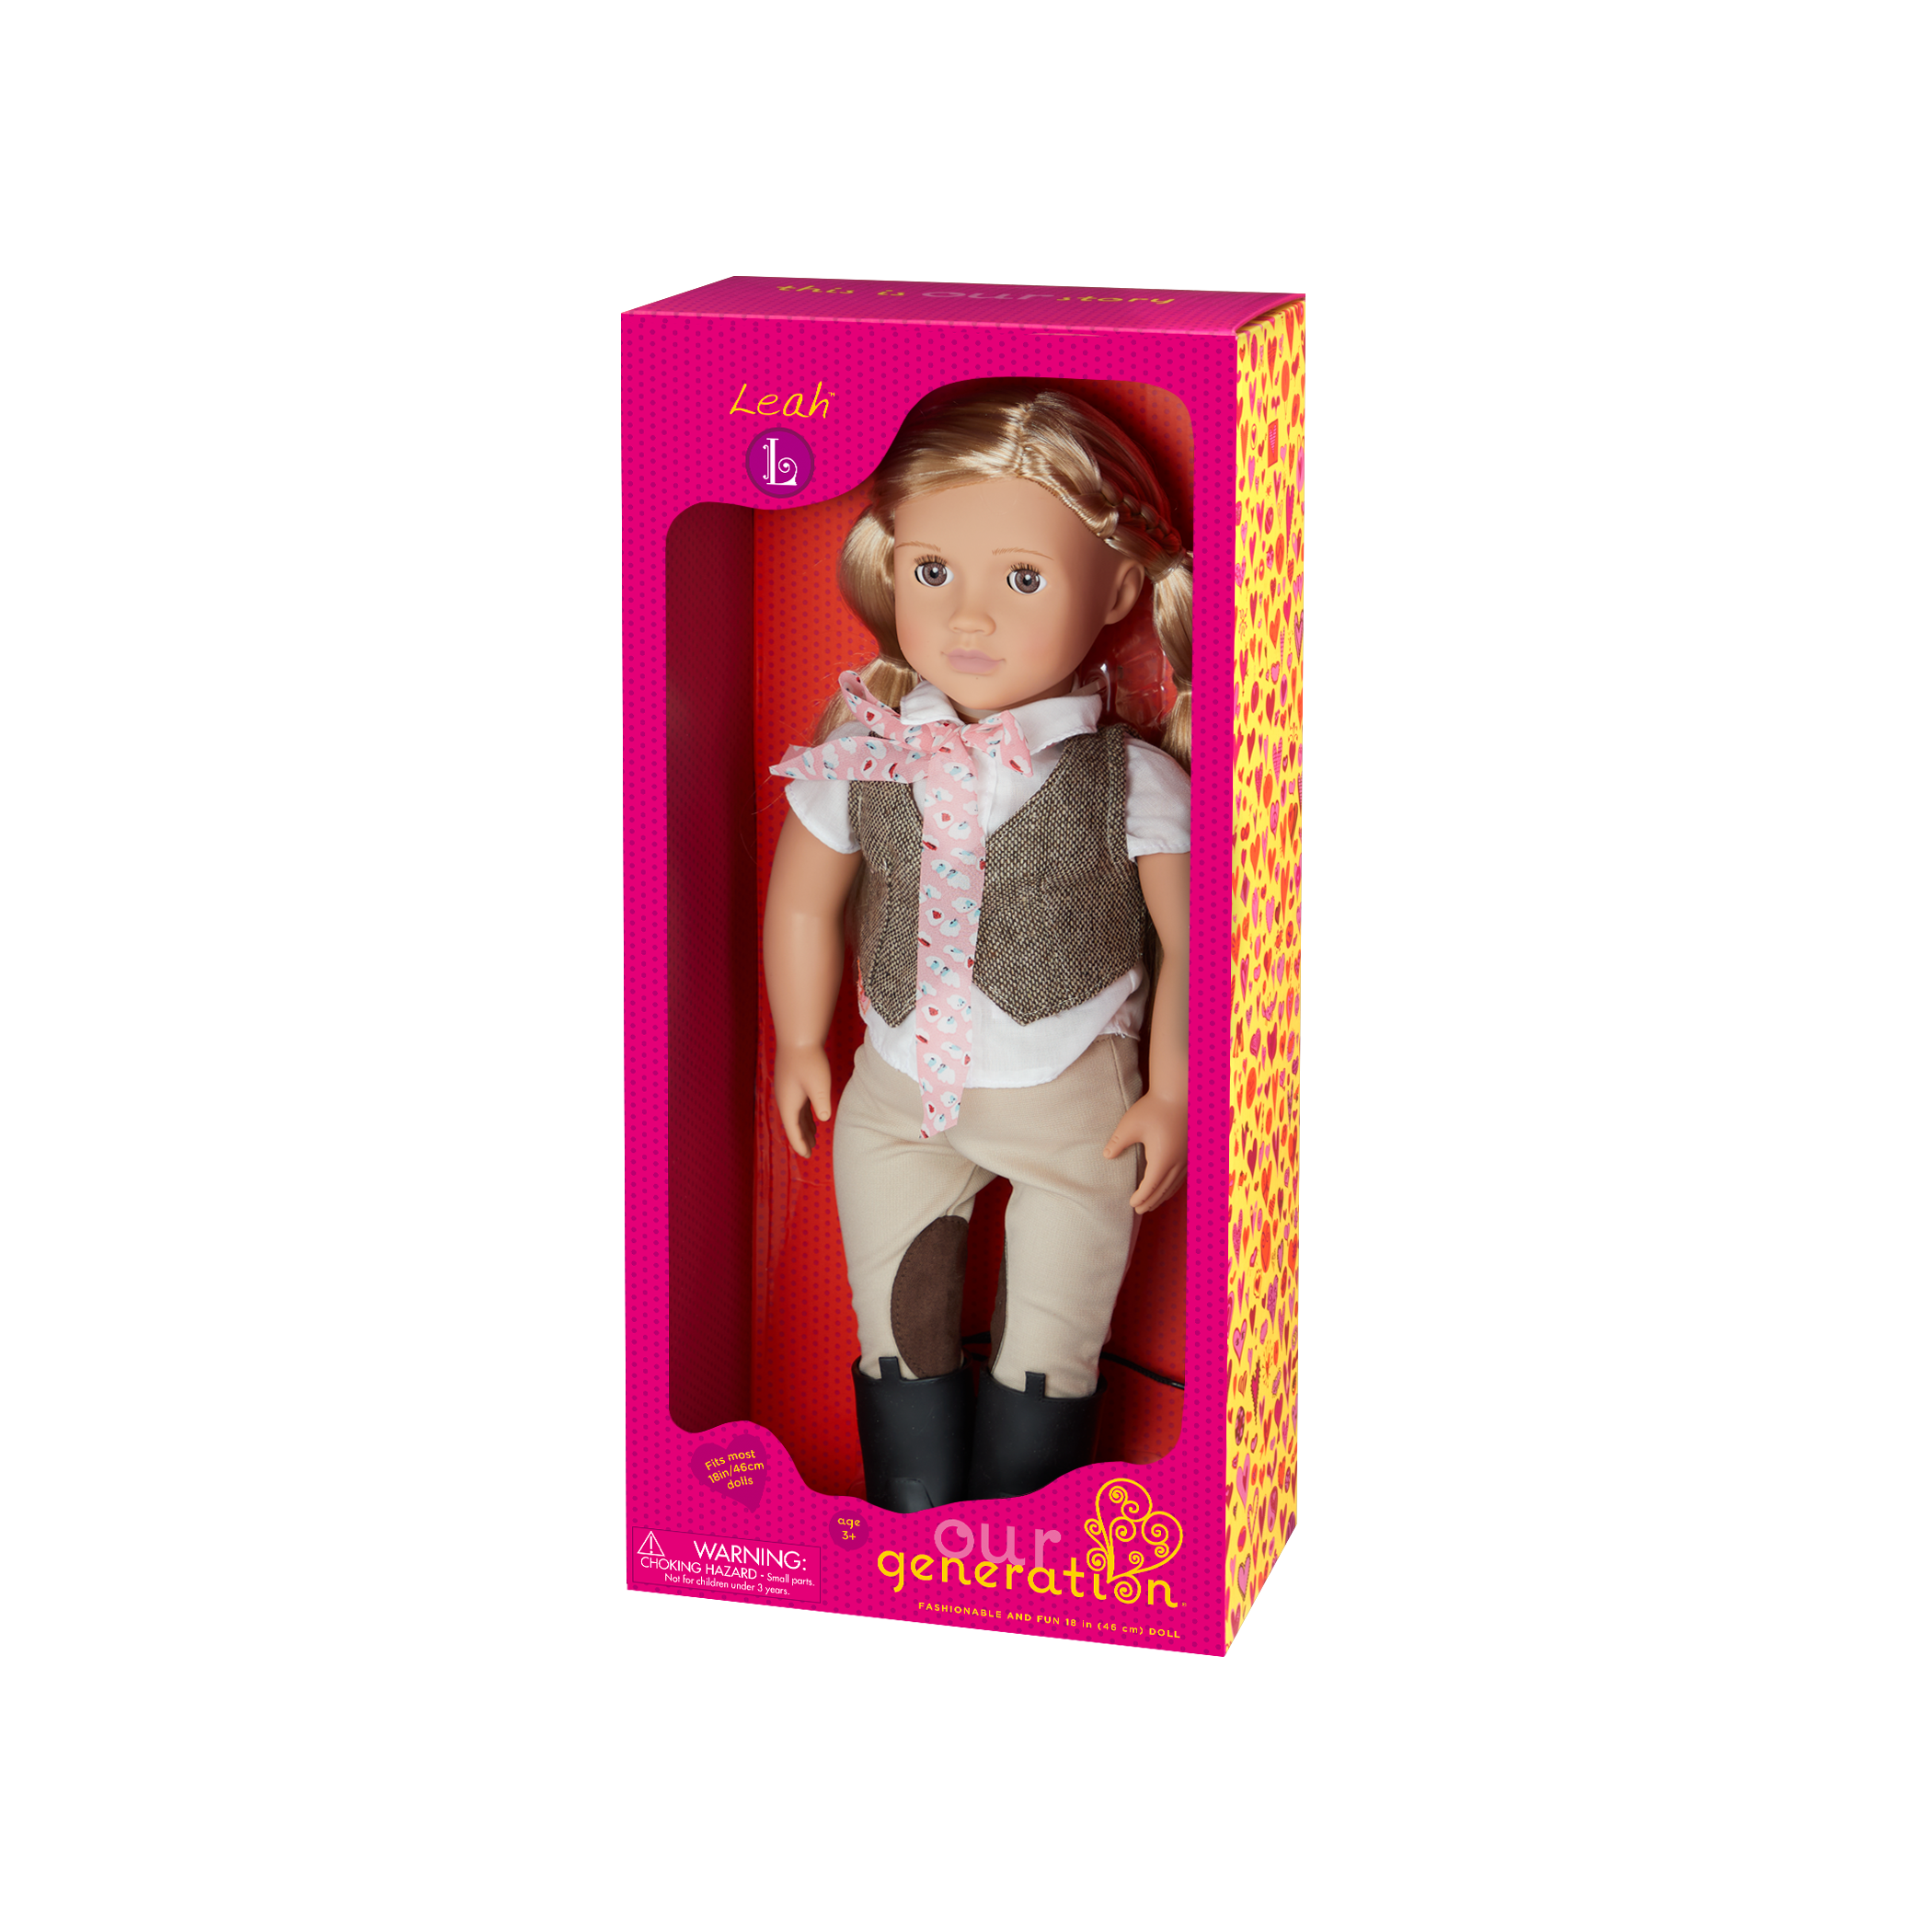 18-inch equestrian doll with blonde hair and brown eyes